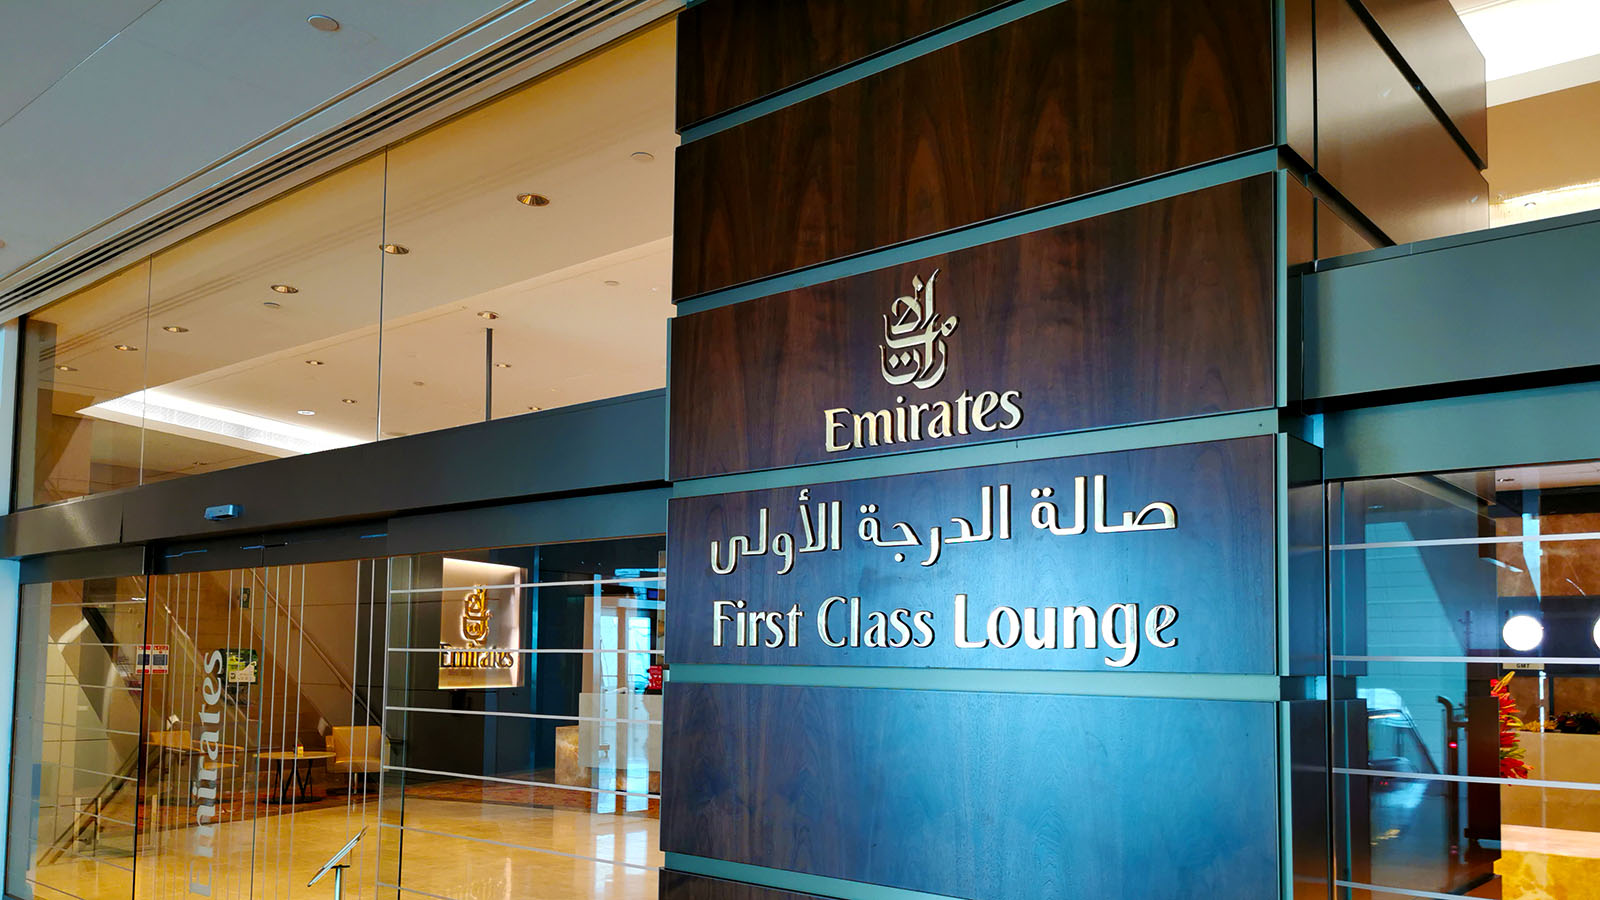 Entrance to the Emirates First Class Lounge in Dubai Concourse A